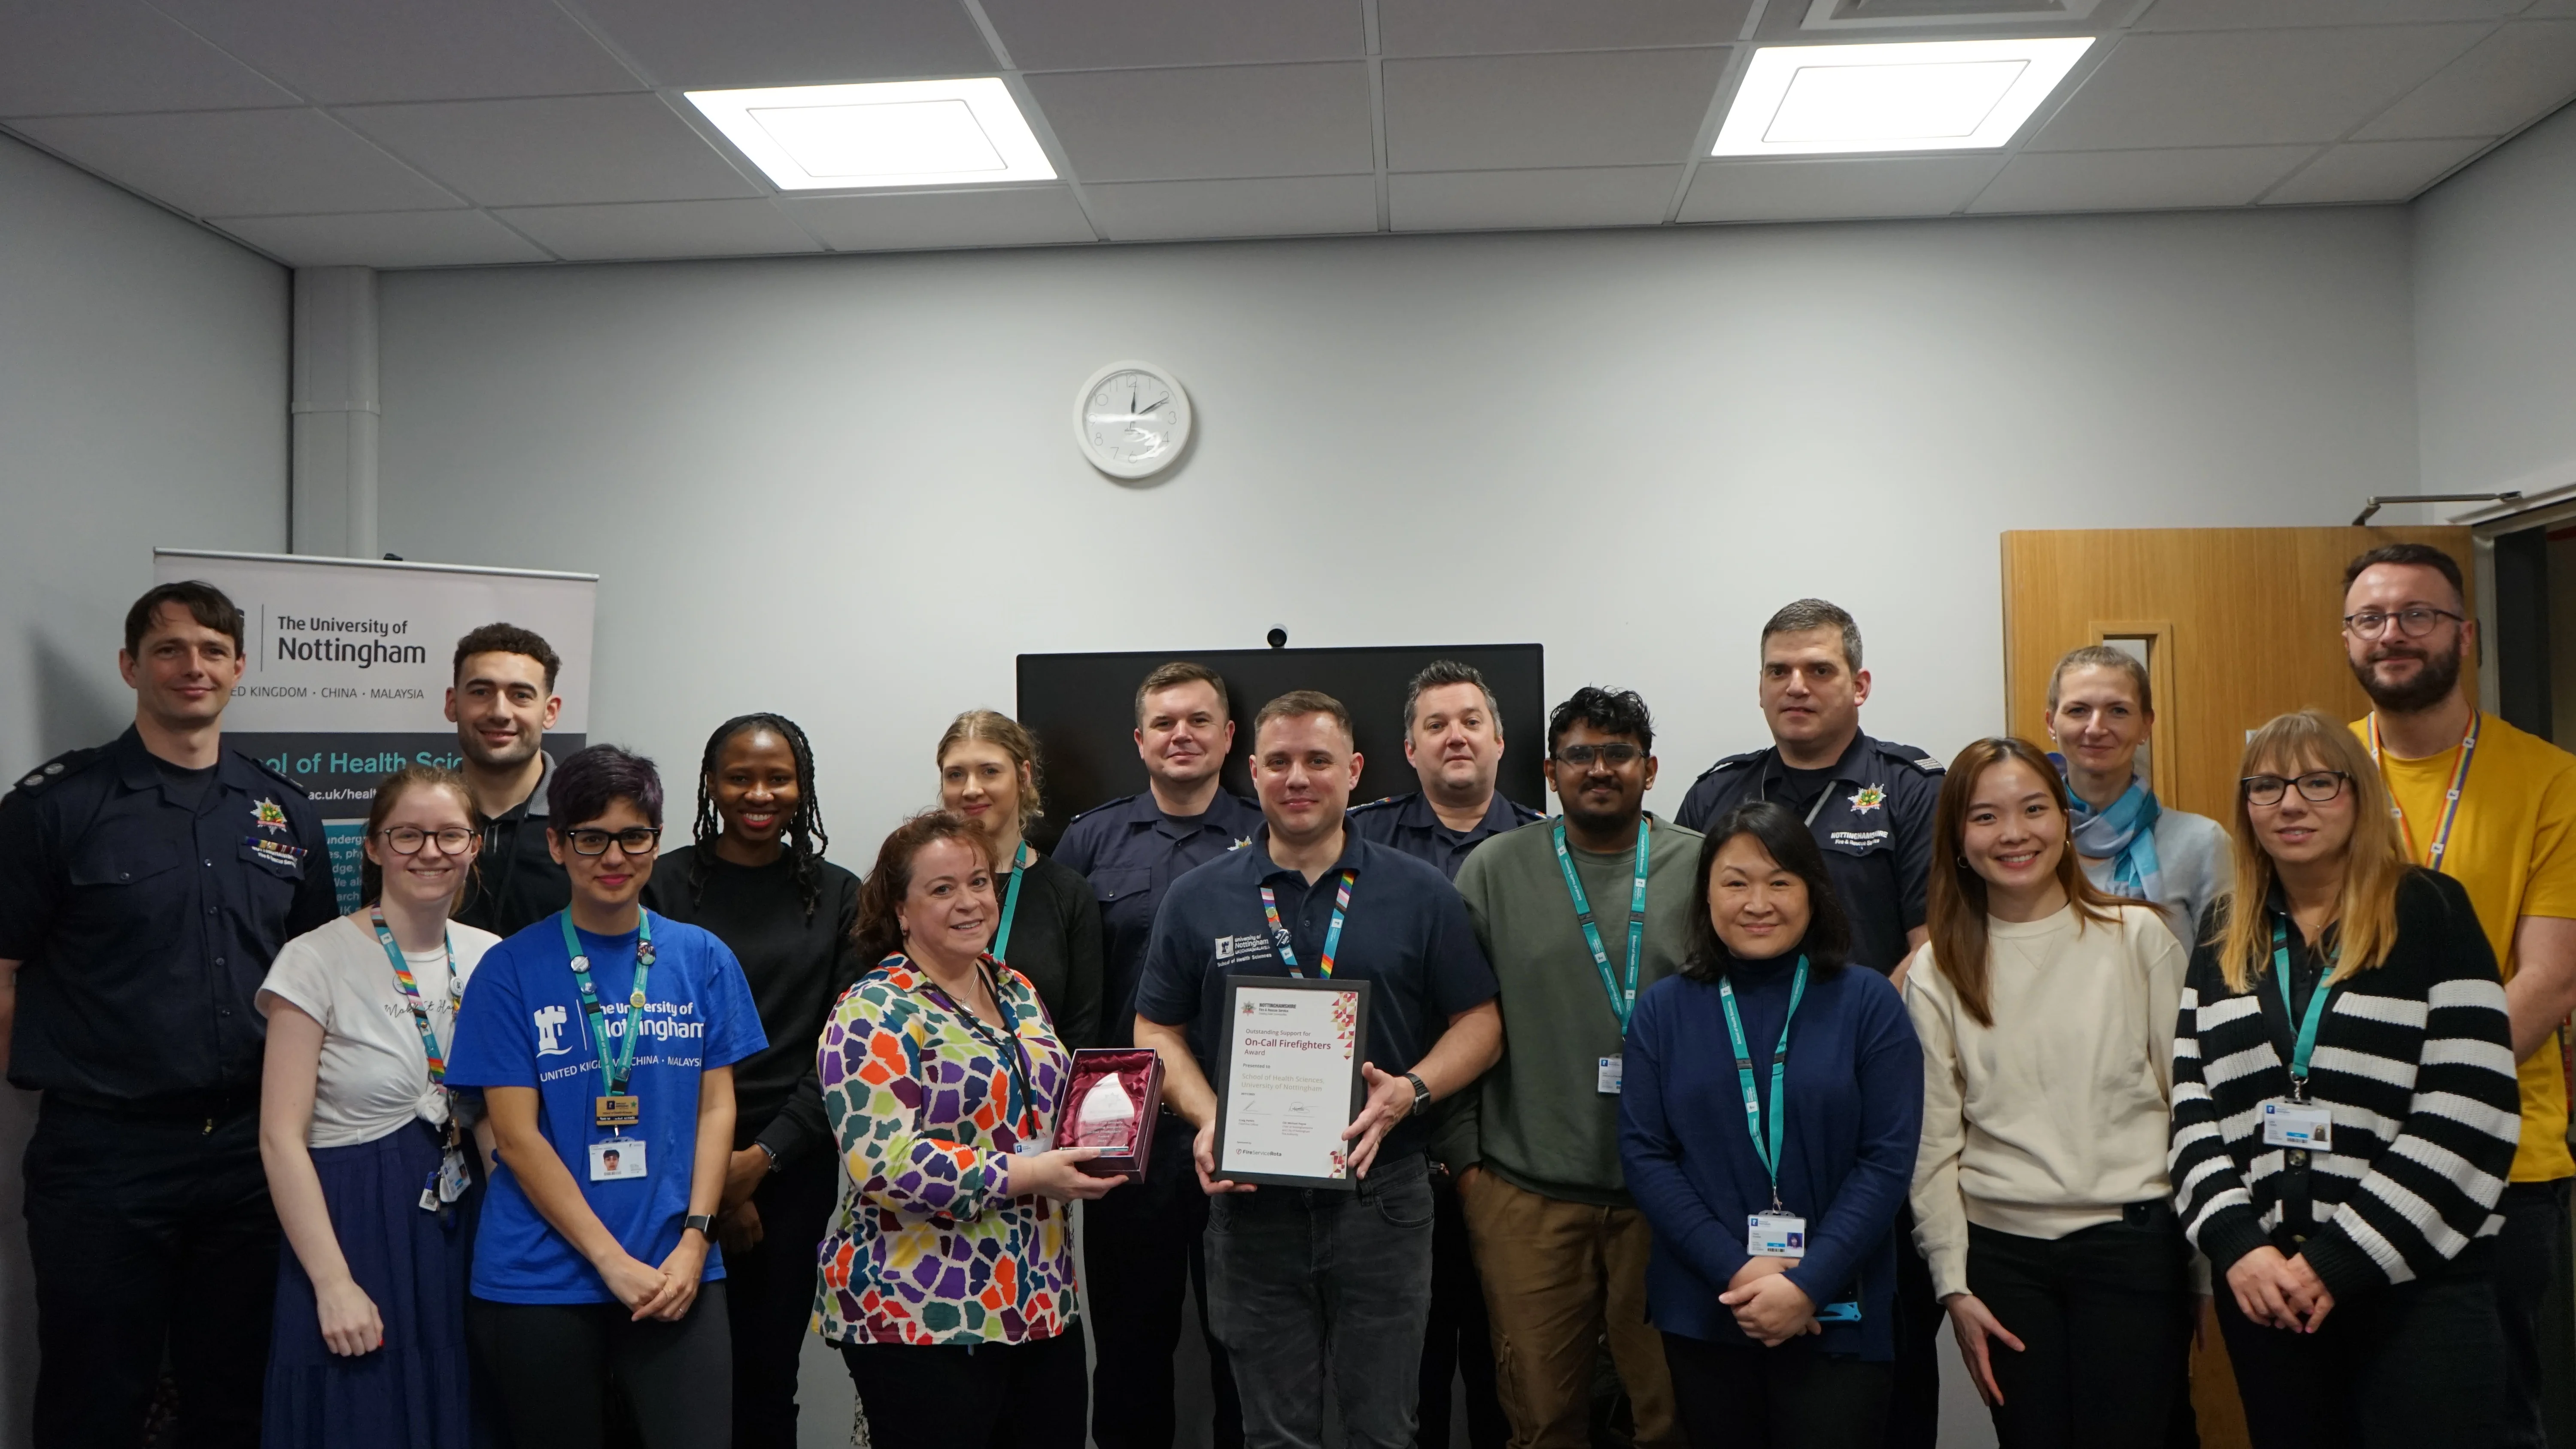 Aaron in the centre holding the award, flanked by students and members of staff.